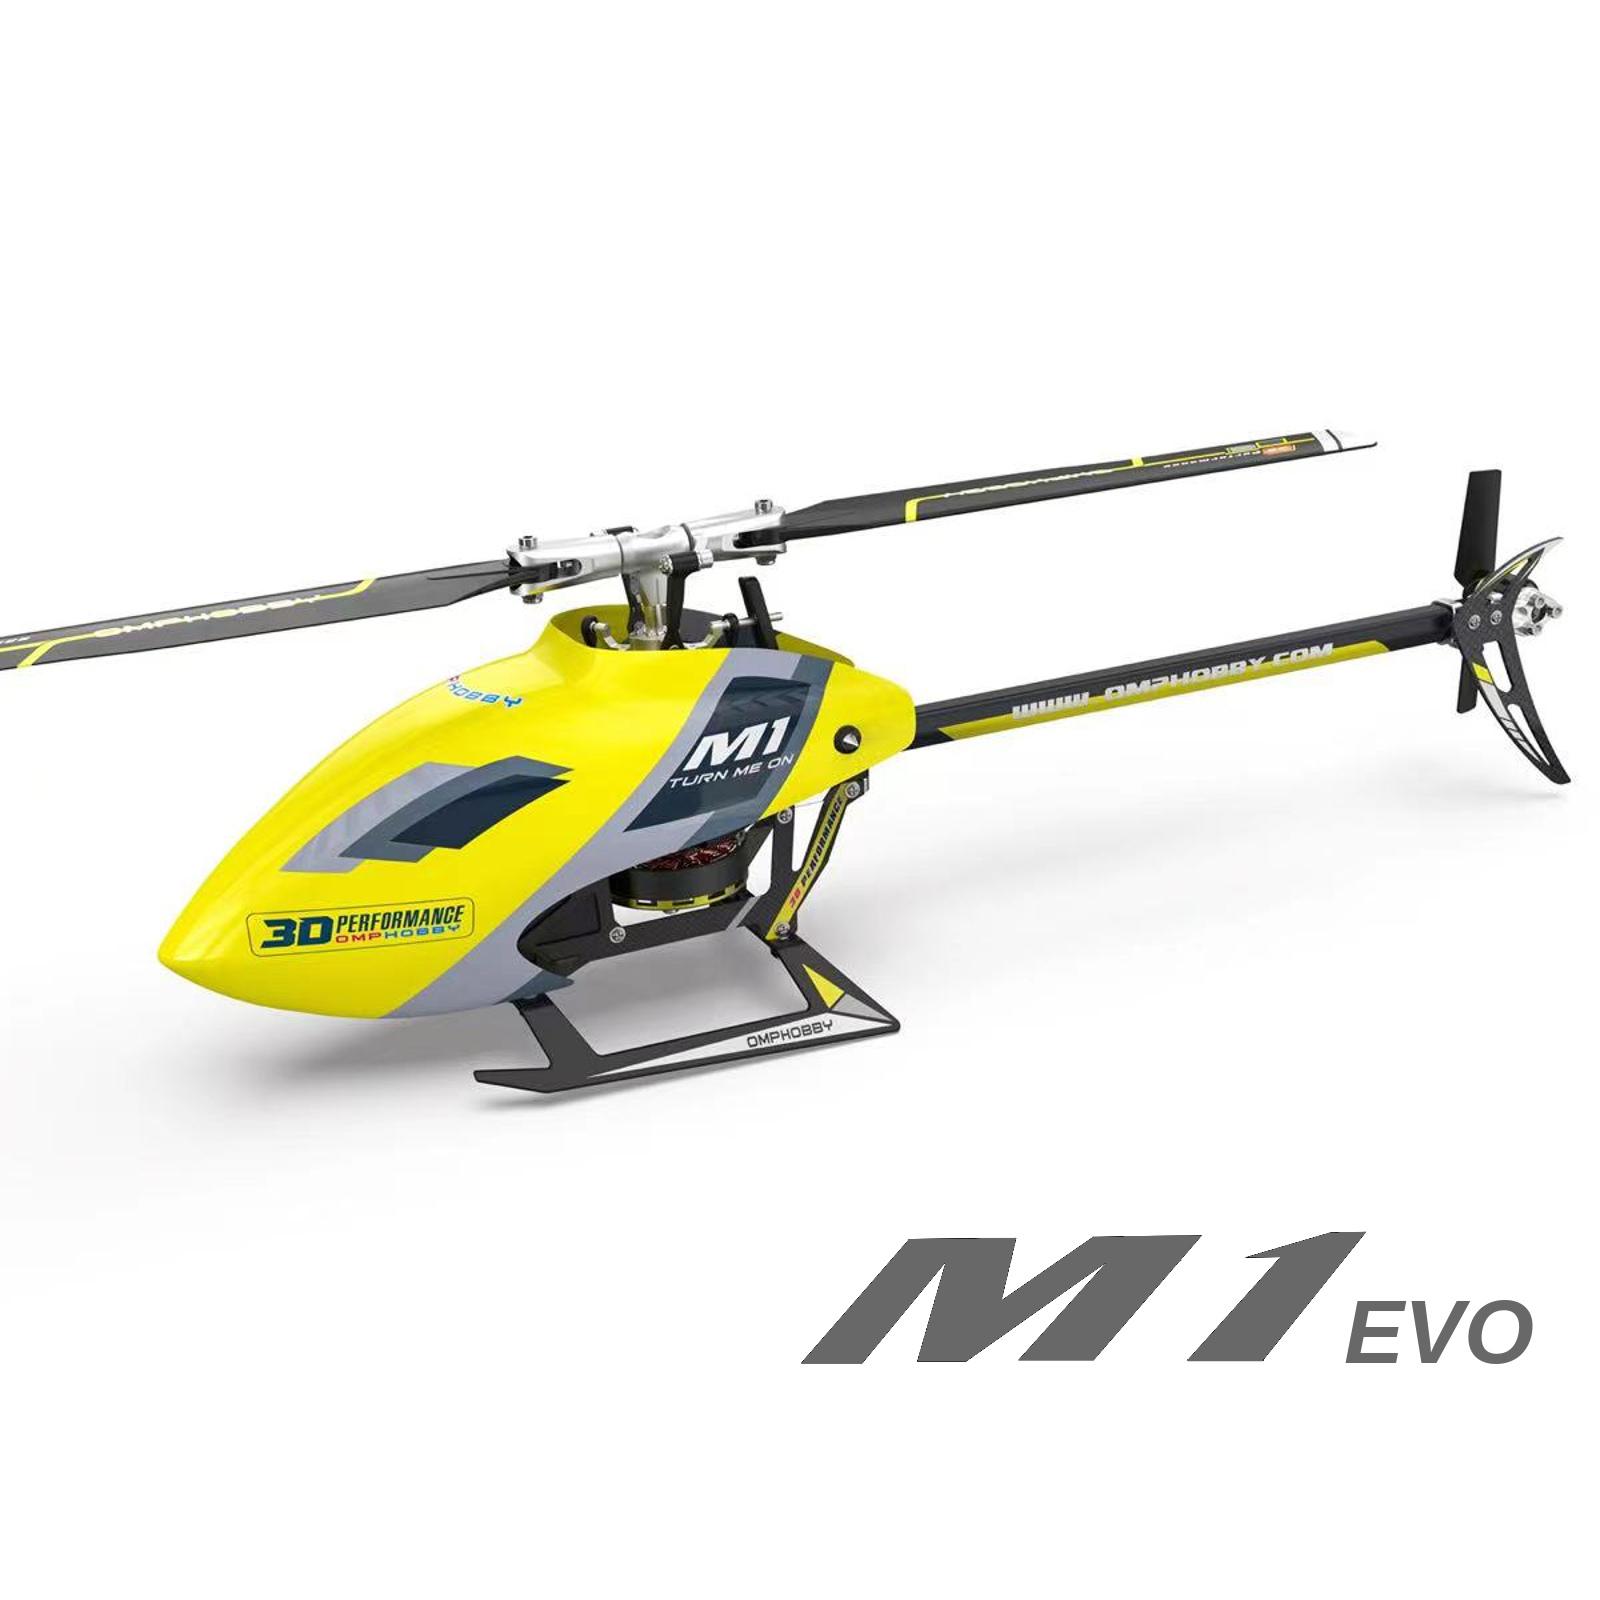 M1 Evo Helicopter: Versatility and Superior Performance: Practical Uses of the M1 Evo Helicopter